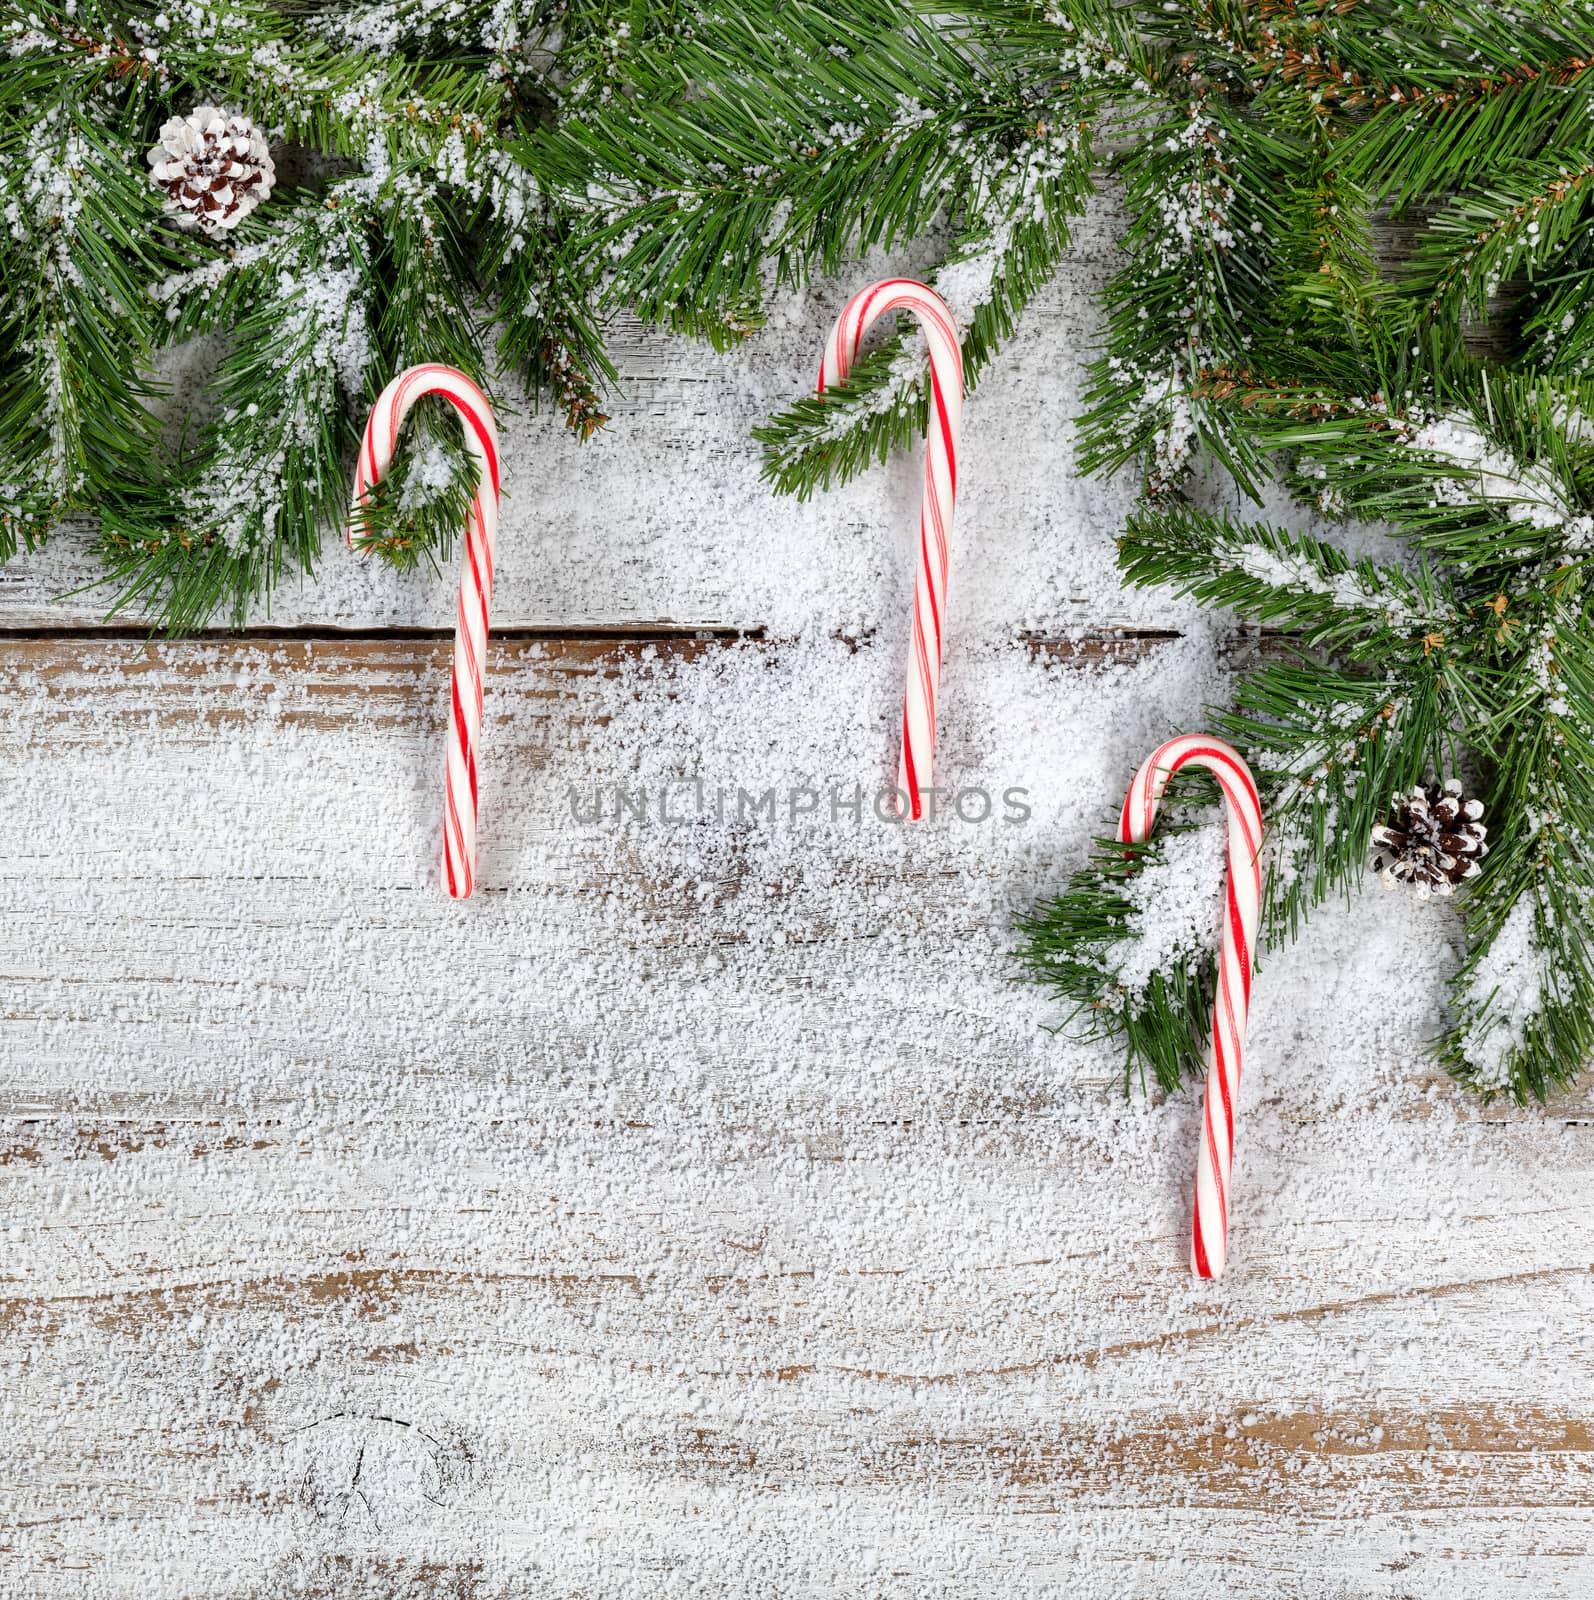 Snowy Christmas fir branches and candy canes on rustic wood in flat lay format